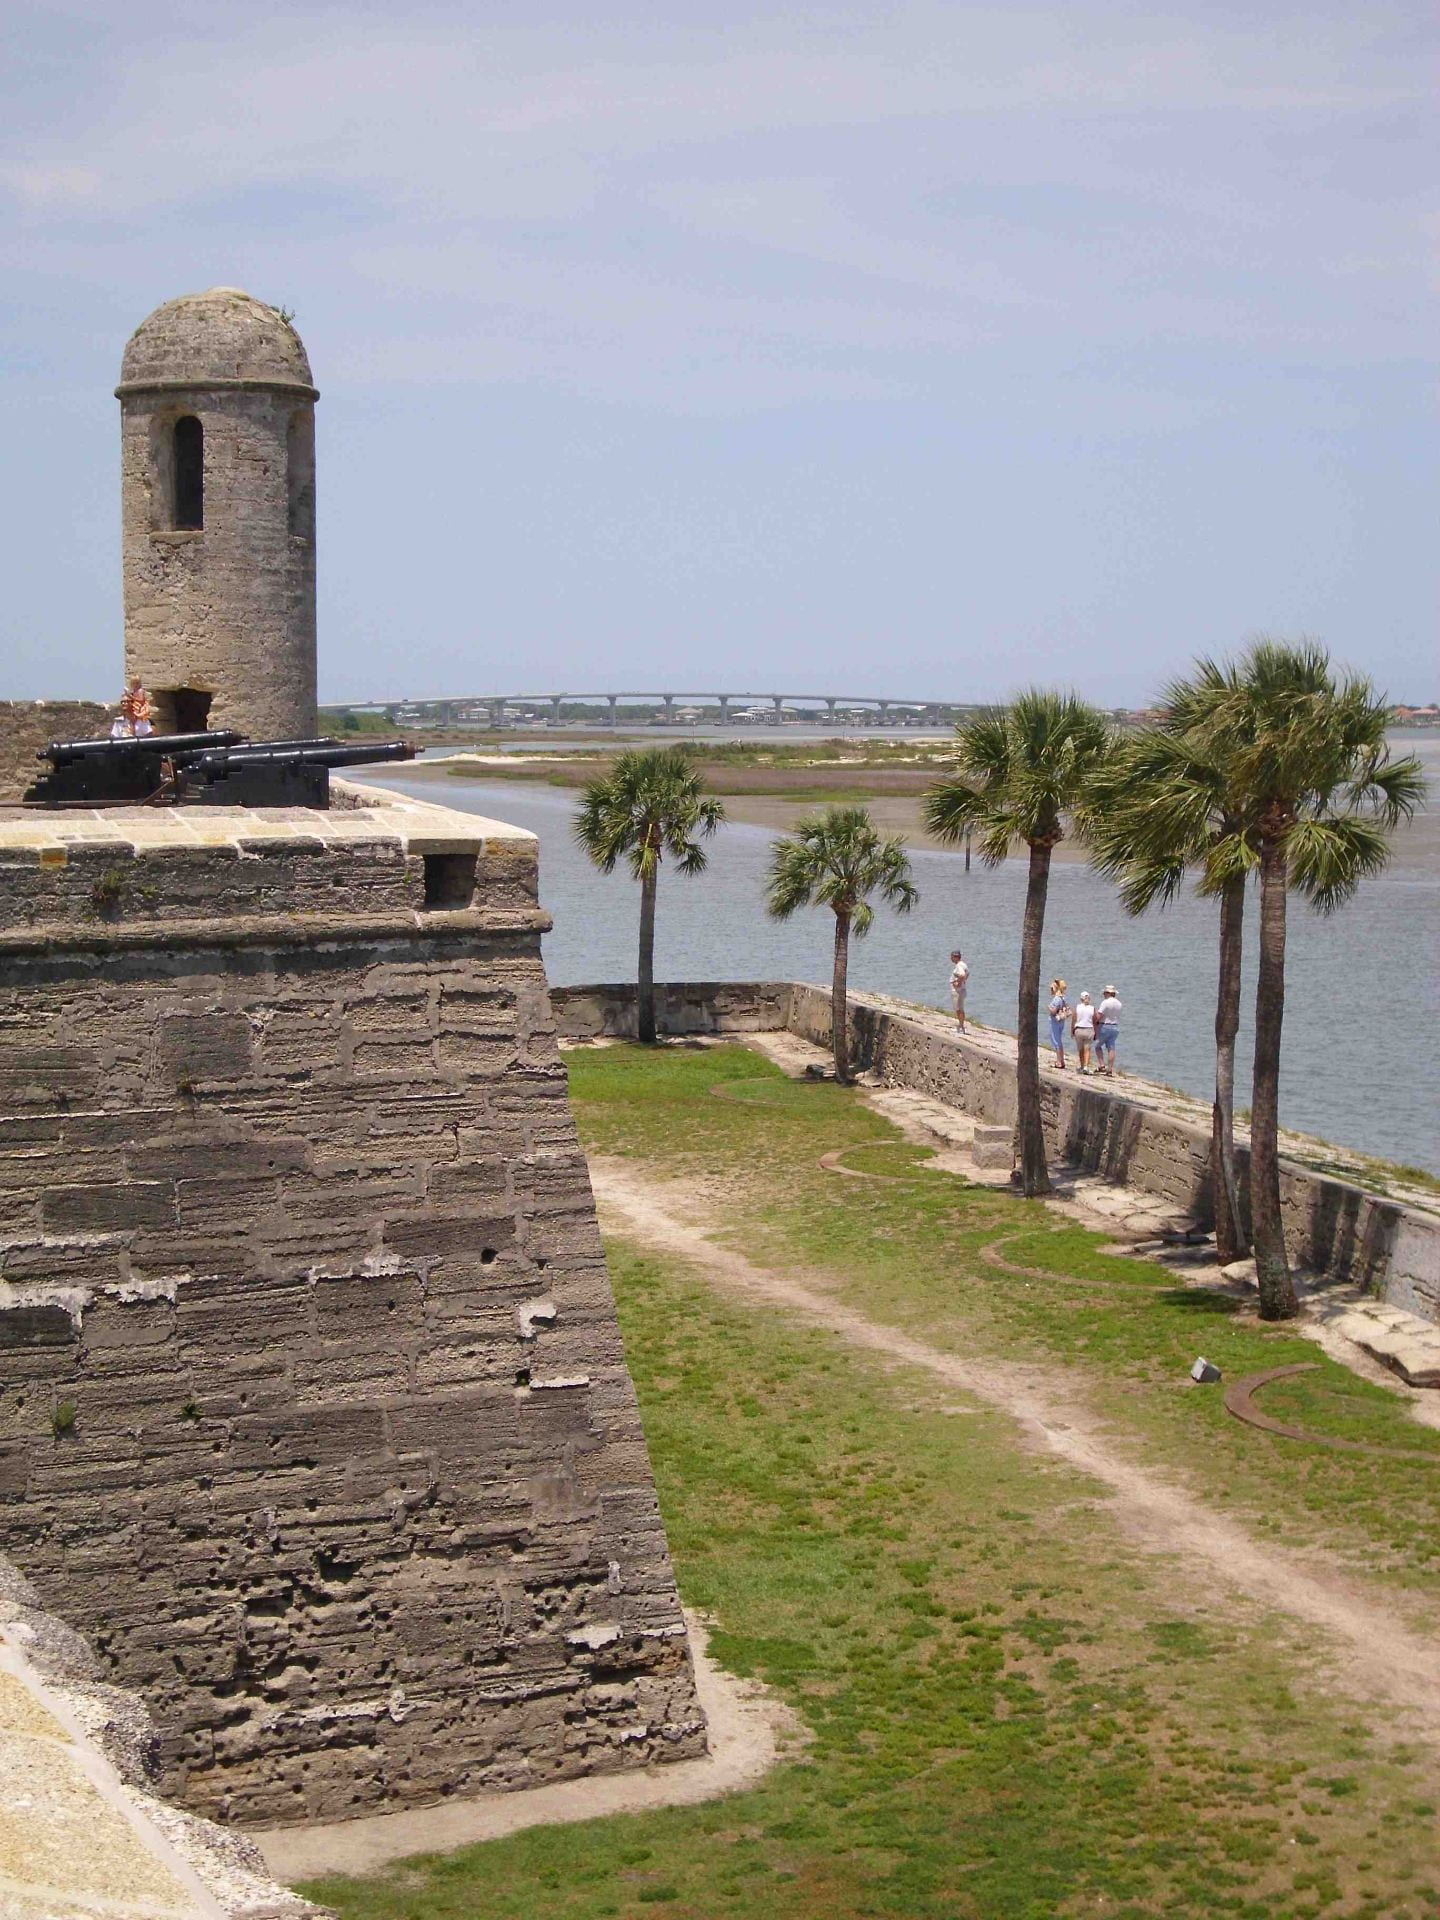 A photograph from the walls of Fort San Marcos looking at one of the corner towers